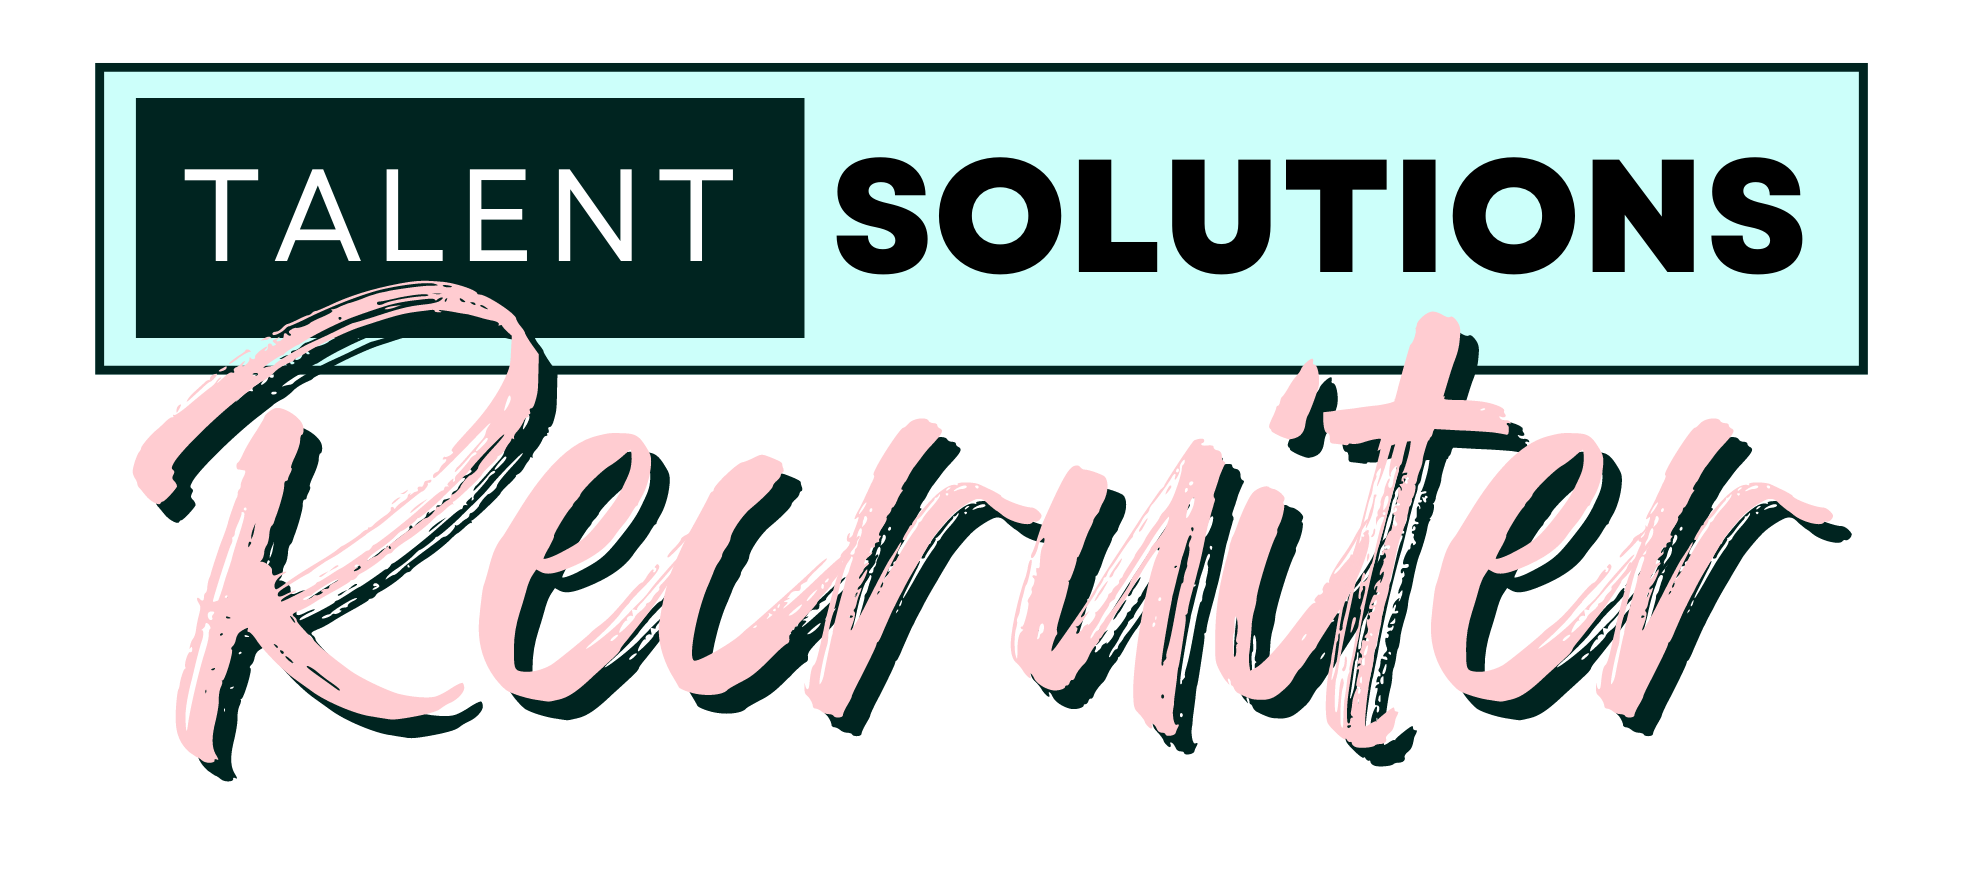 Talent Solutions, Recruiting & Staffing